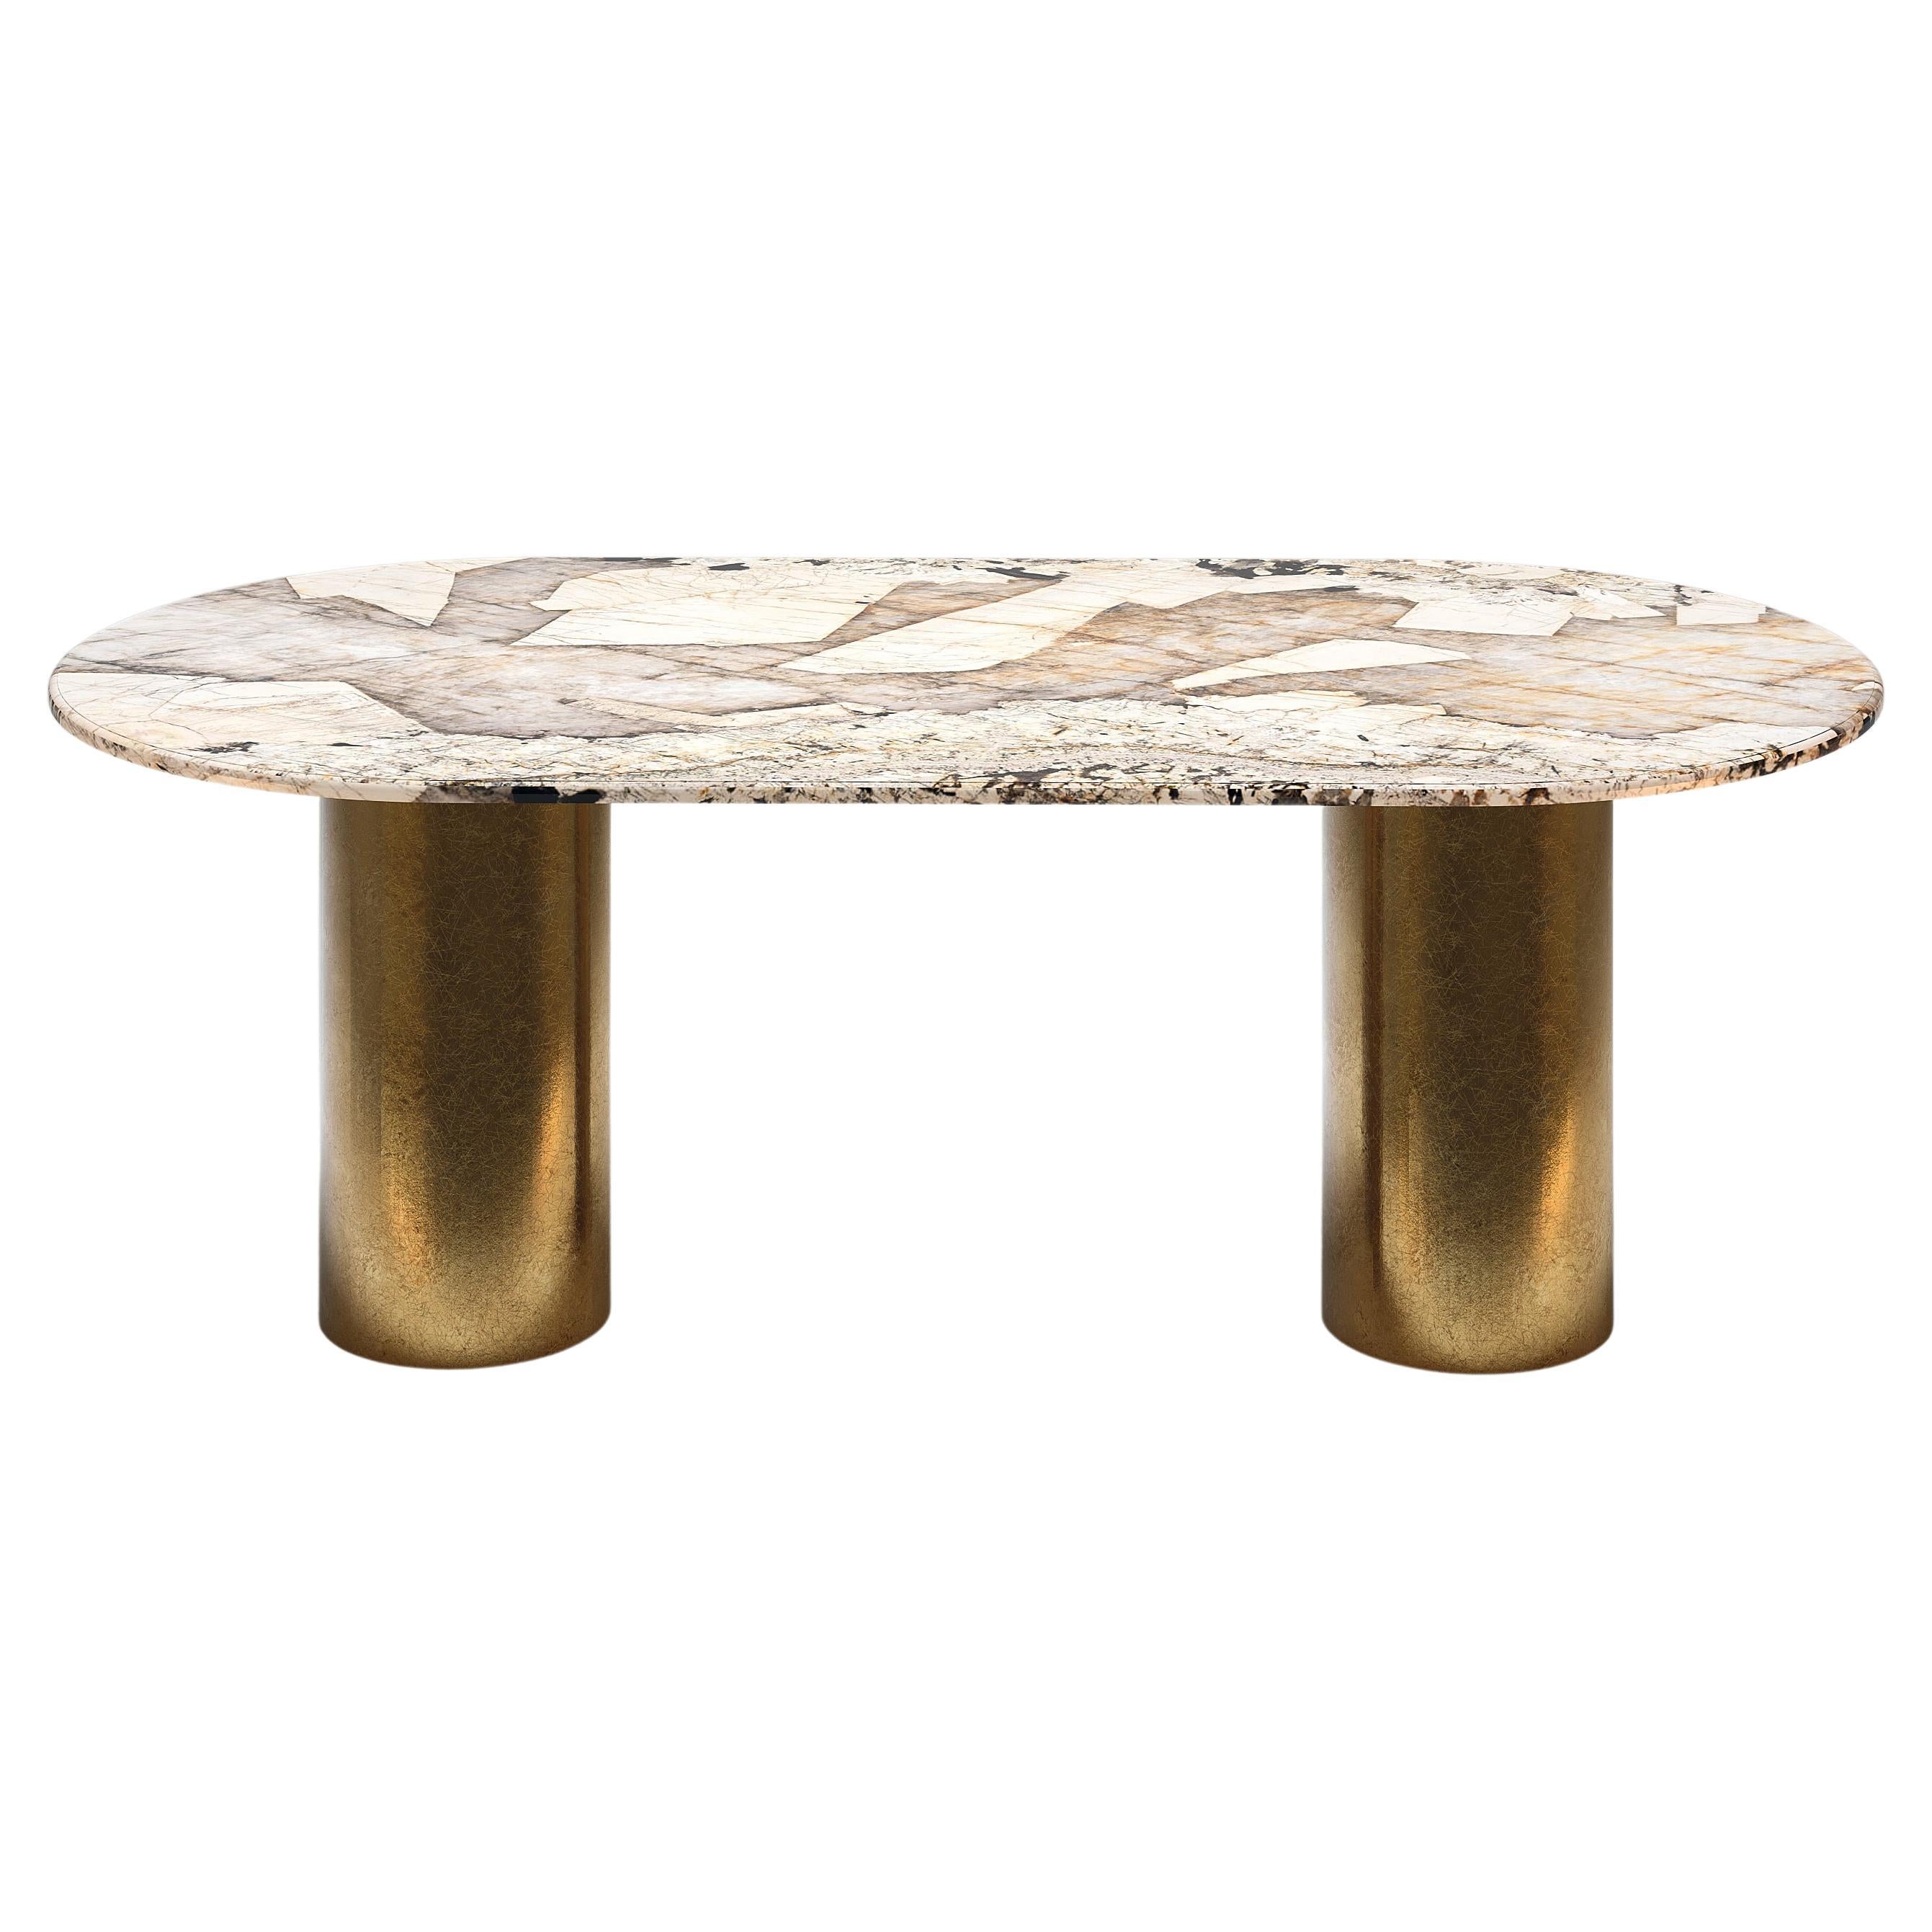 Ovale Nq1, Dining Table Patagonia Quartzite and gold leaf By DFdesignlab  For Sale